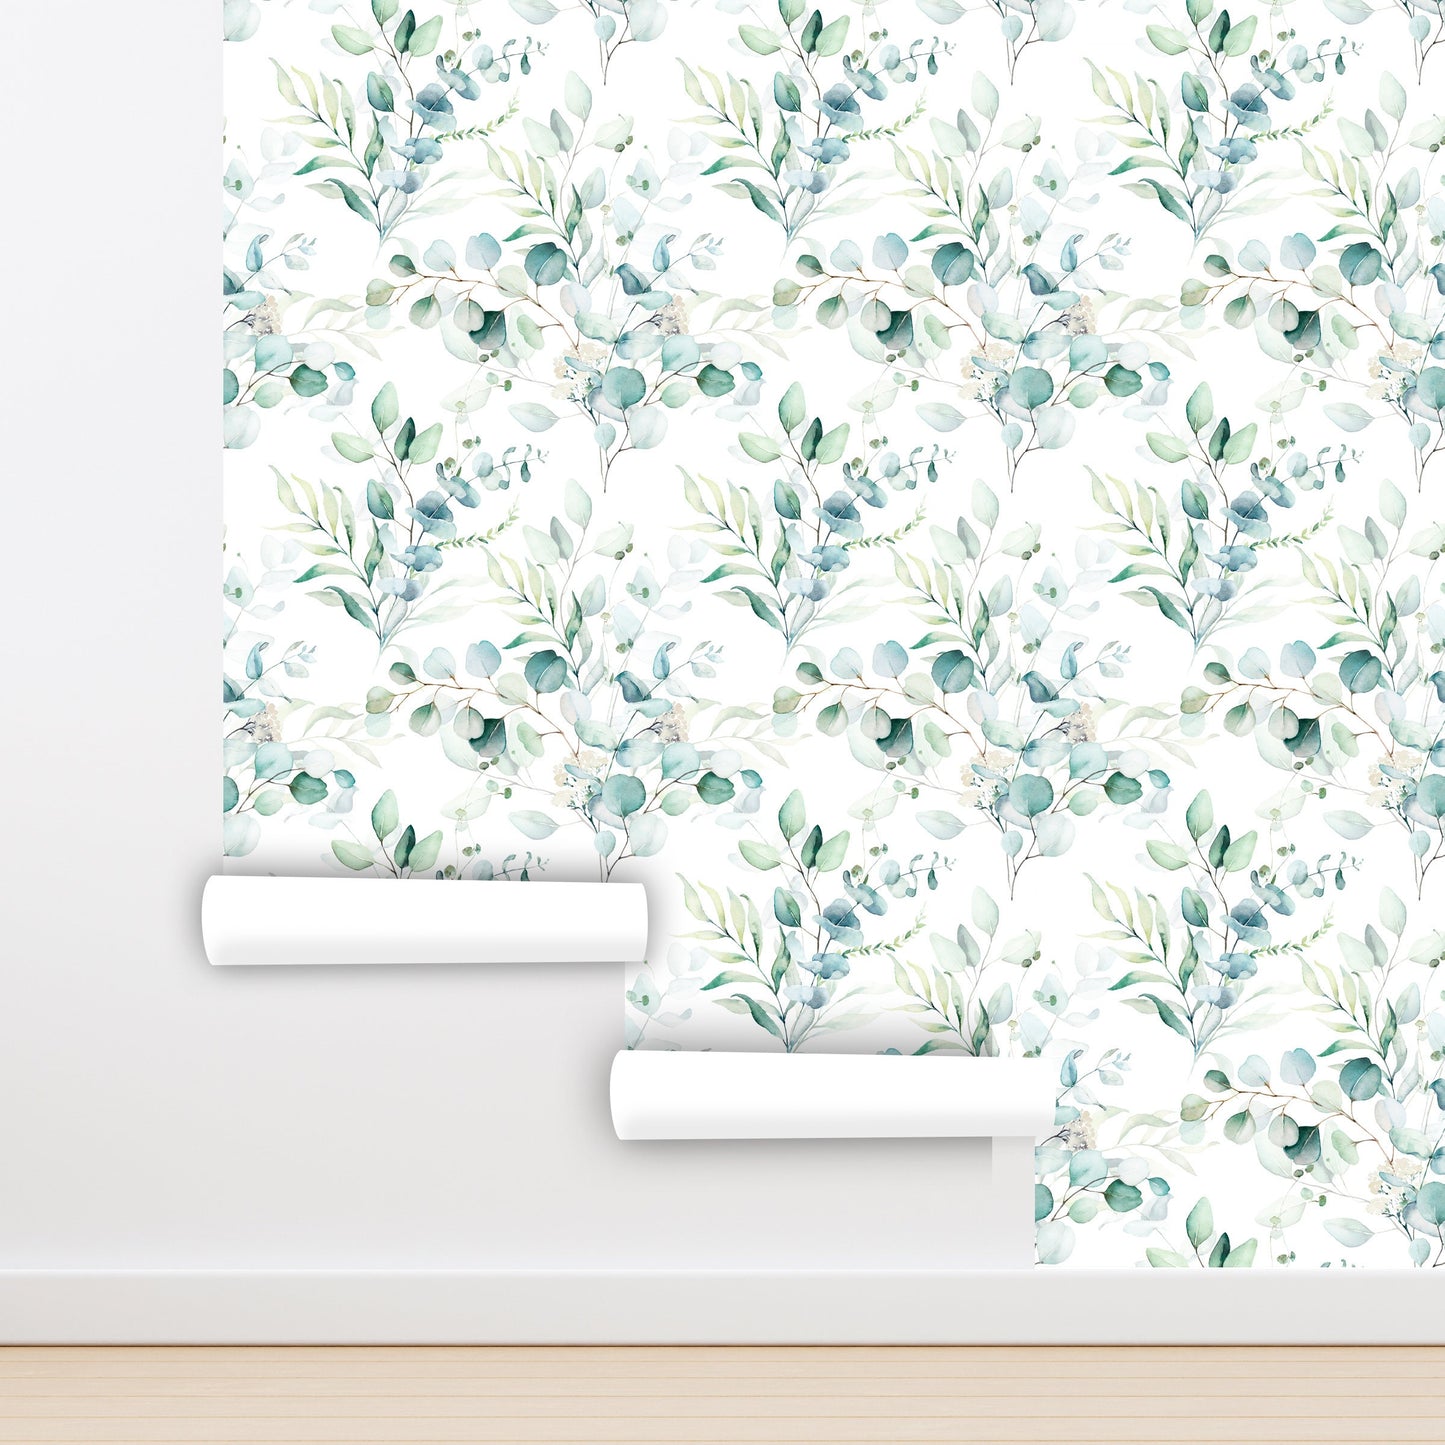 Green Leaves Wallpaper, Eucalyptus Wallpaper Peel and Stick, Botanical Wallpaper, Nursery Wallpapers, Removable Wall Paper